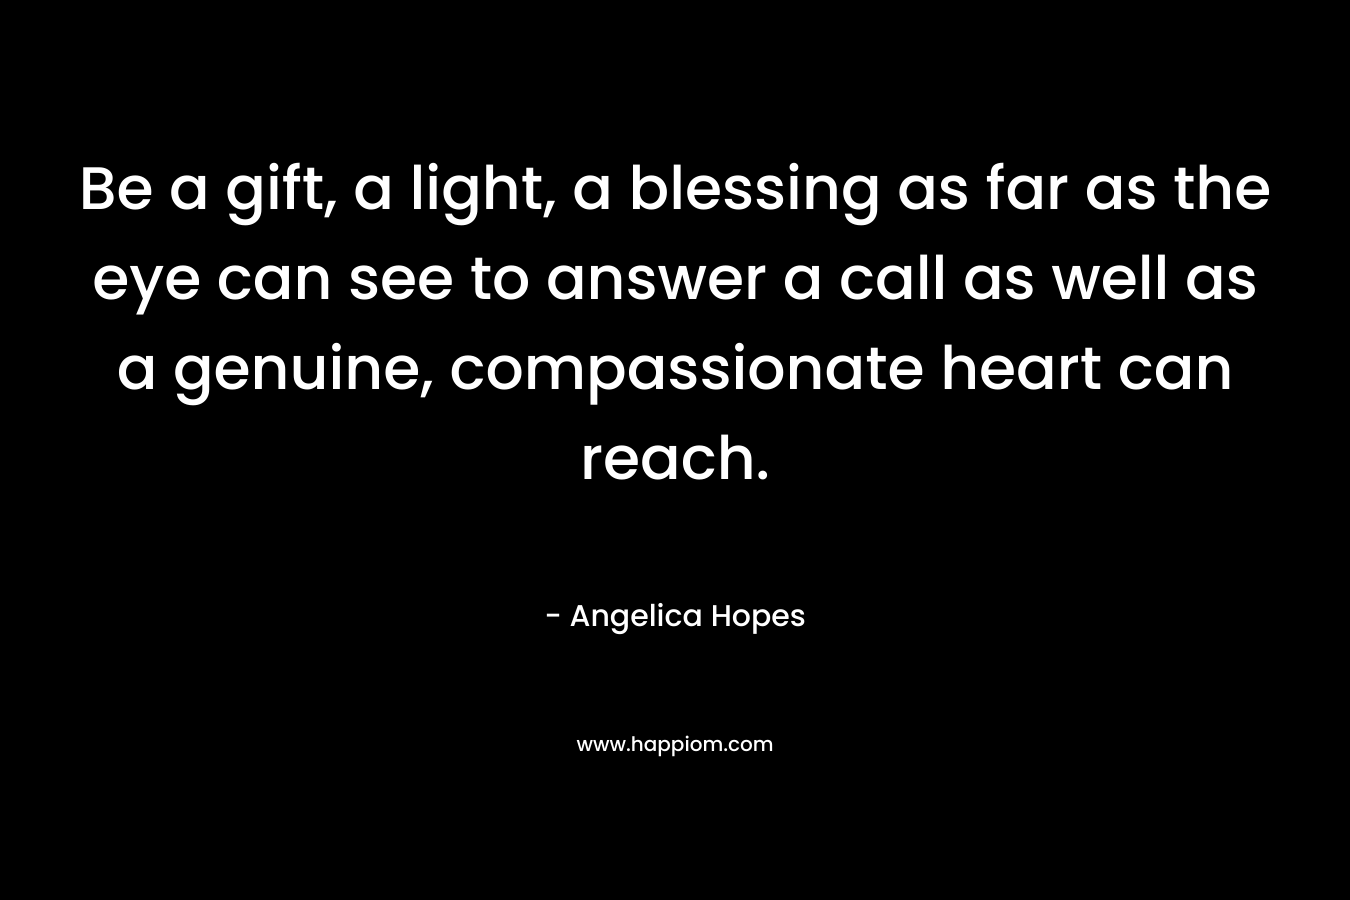 Be a gift, a light, a blessing as far as the eye can see to answer a call as well as a genuine, compassionate heart can reach.